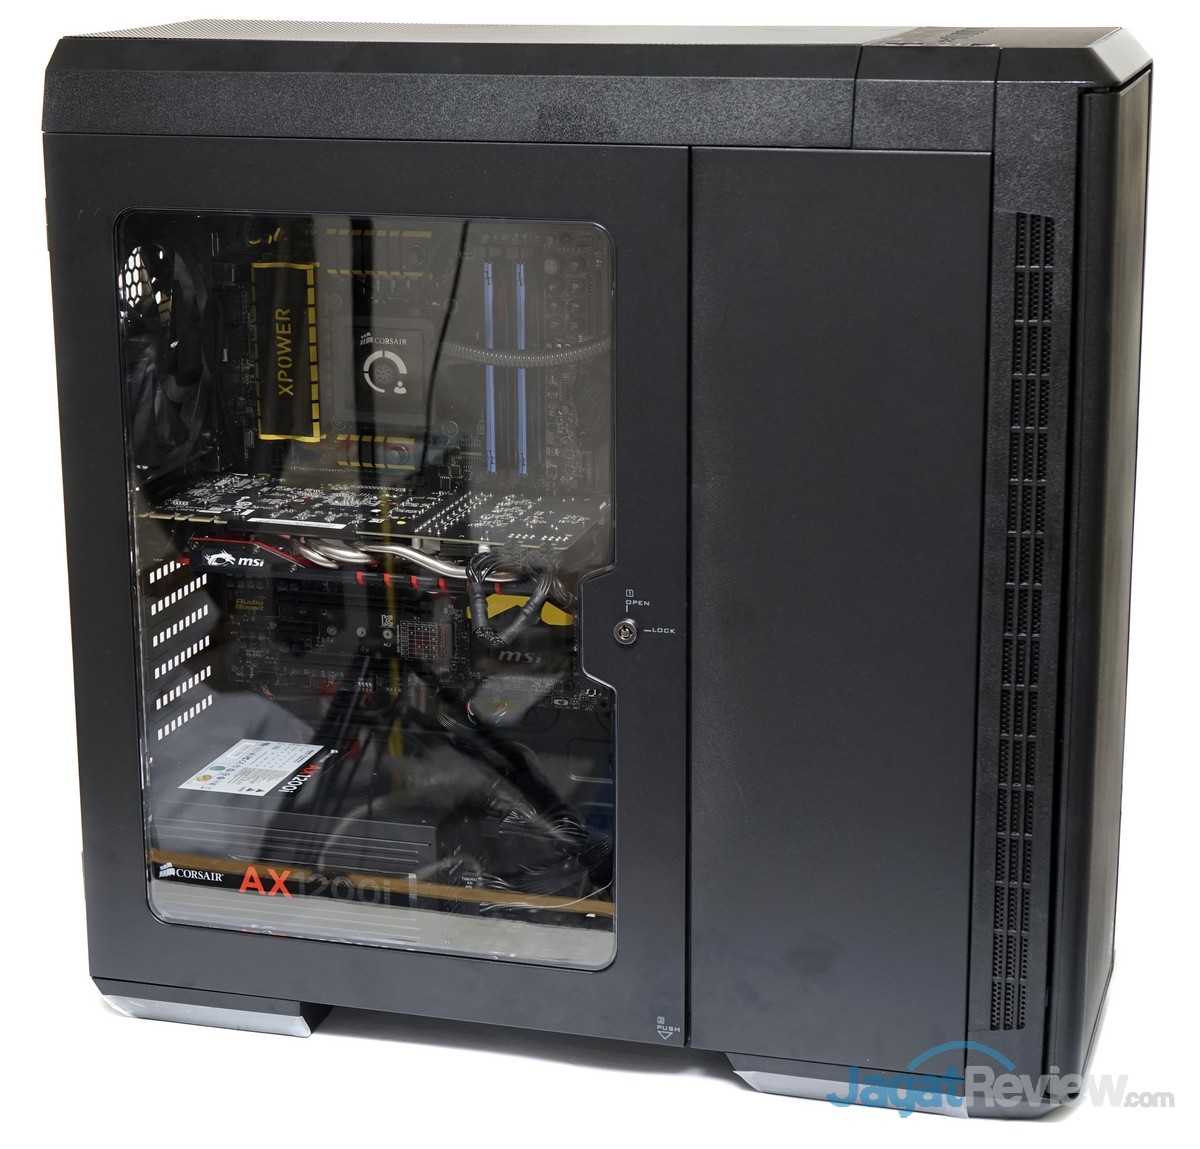 Thermaltake urban t81 full-tower chassis review